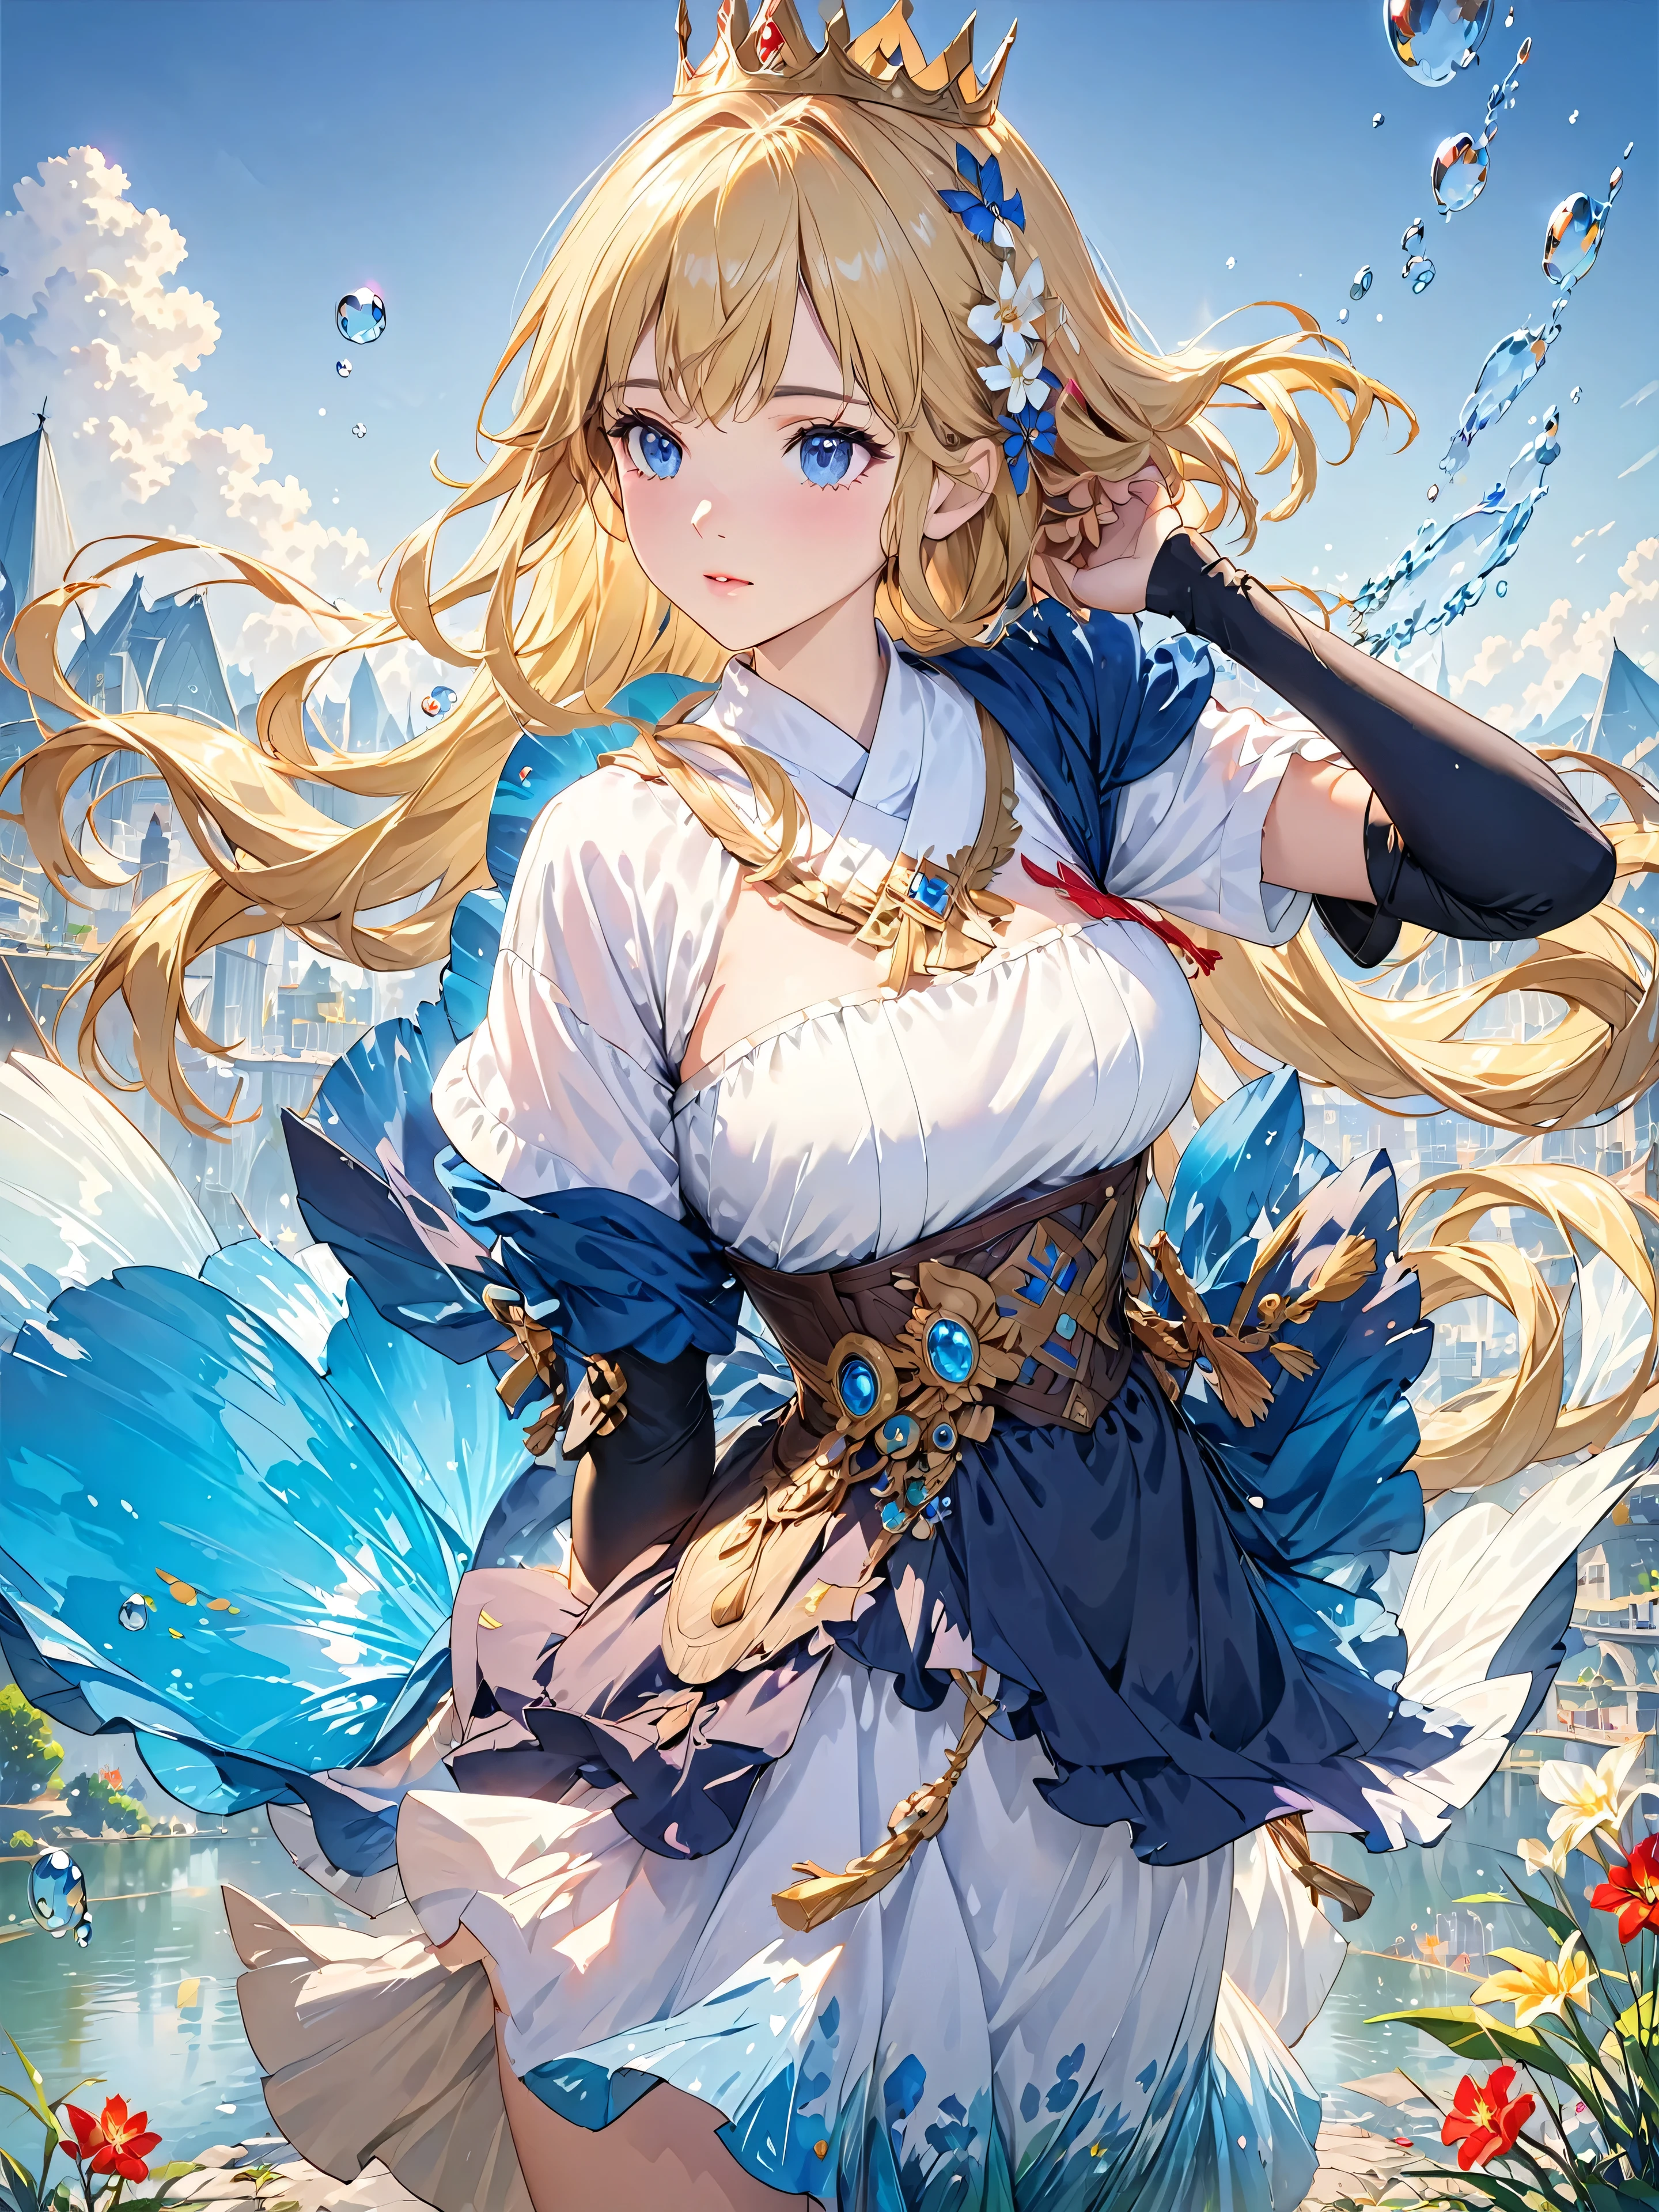 "(best quality,4k,8K,high resolution,masterpiece:1.2), Extremely detailed,(Practical,Realistically,Realistically:1.37), Impressionism, Under the water, iris, bubble, Busty girl, fish, Long blond hair, 洪water, , water, Princess, Blonde hair and blue eyes, Off-shoulder short sleeves, ,Low-cut clothing,blue eyes, fairies, The Legend of Zelda, Jewel-like, CG, kingdom city background, mechanical, crown, Lighting Effects."